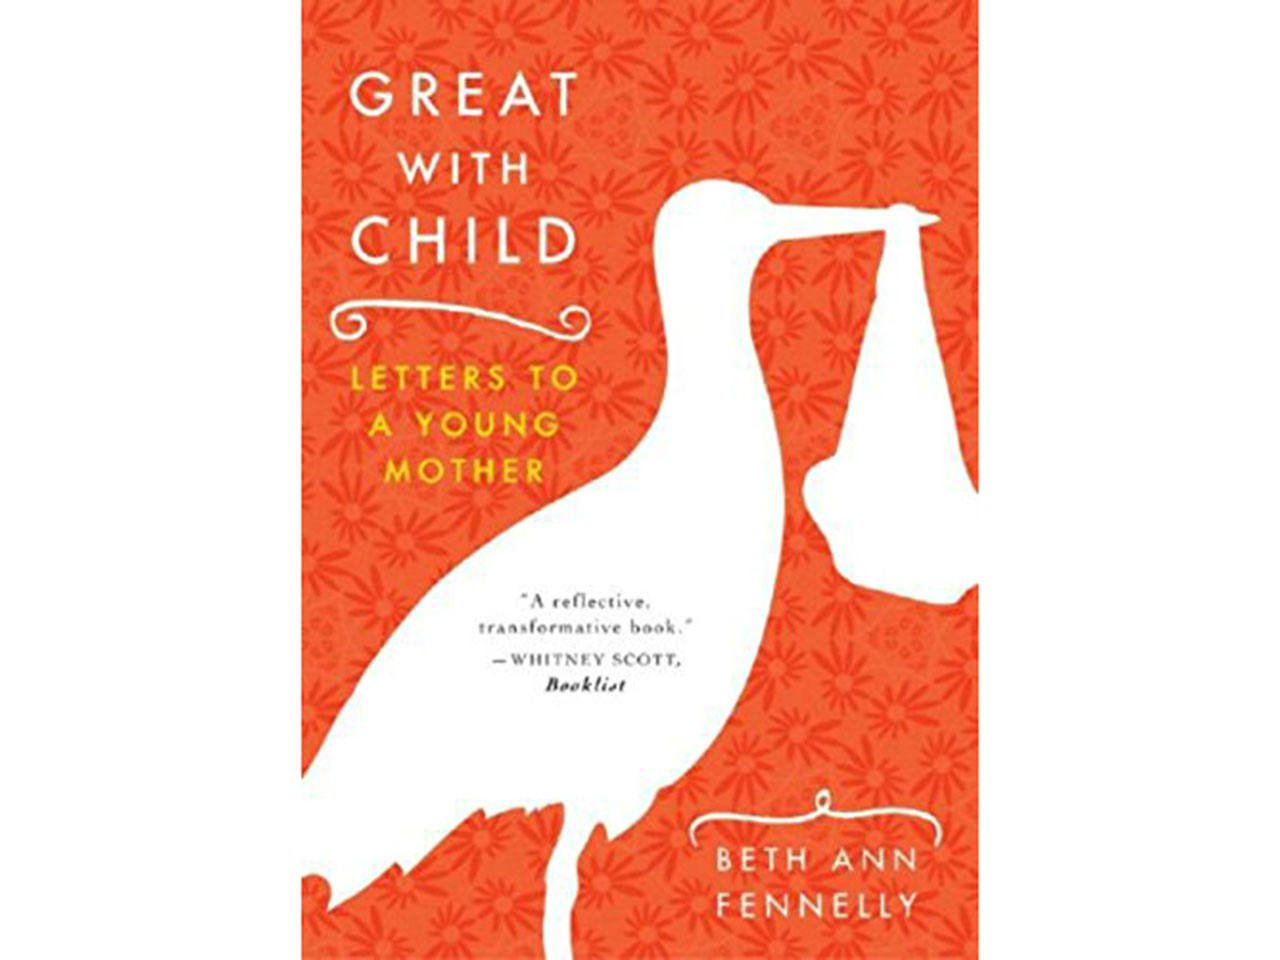 A cover of the book Great with Child: Letters to a Young Mother